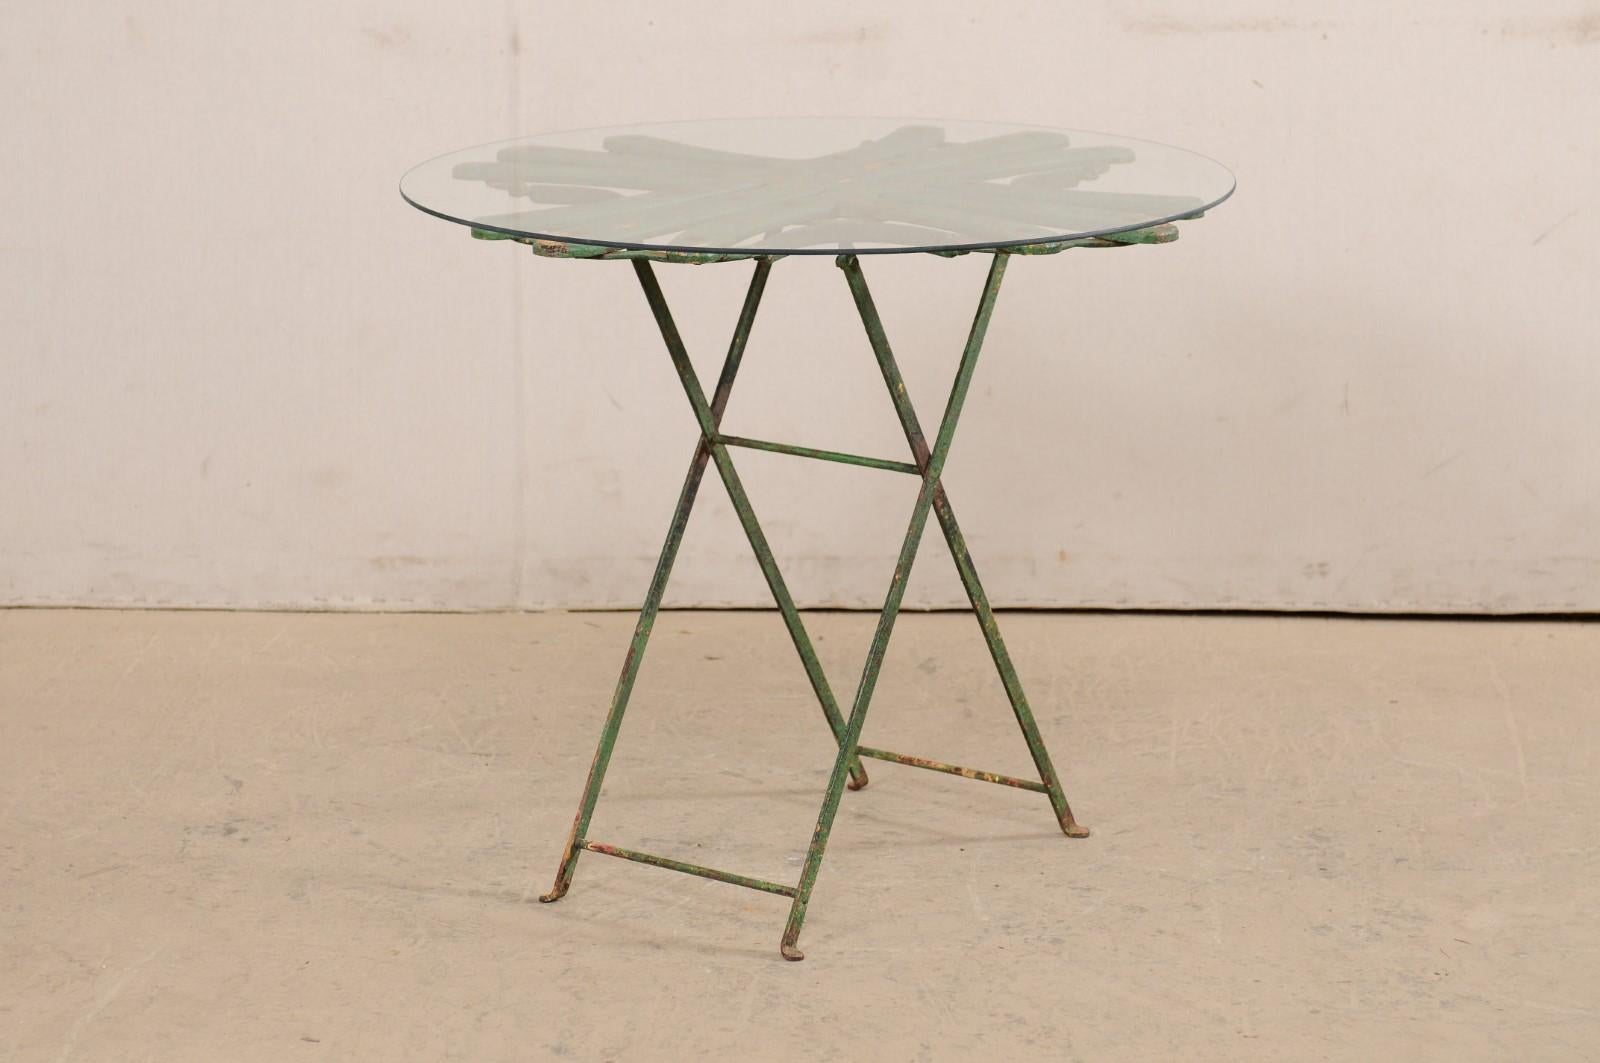 20th Century French Bistro Table with Uniquely-Designed Wood Top, Glass over